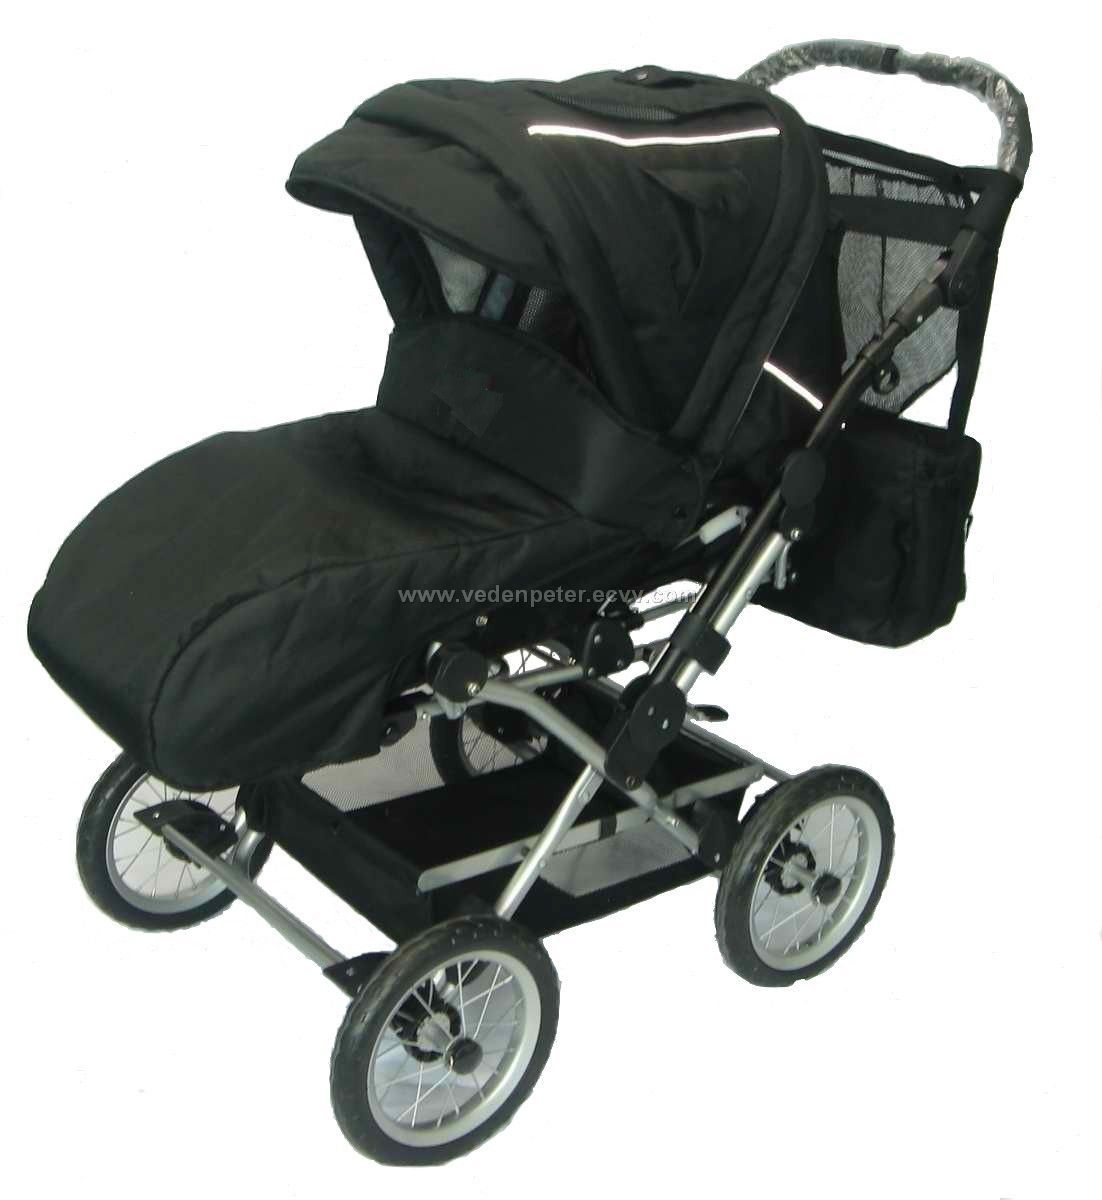 Baby stroller and carseat